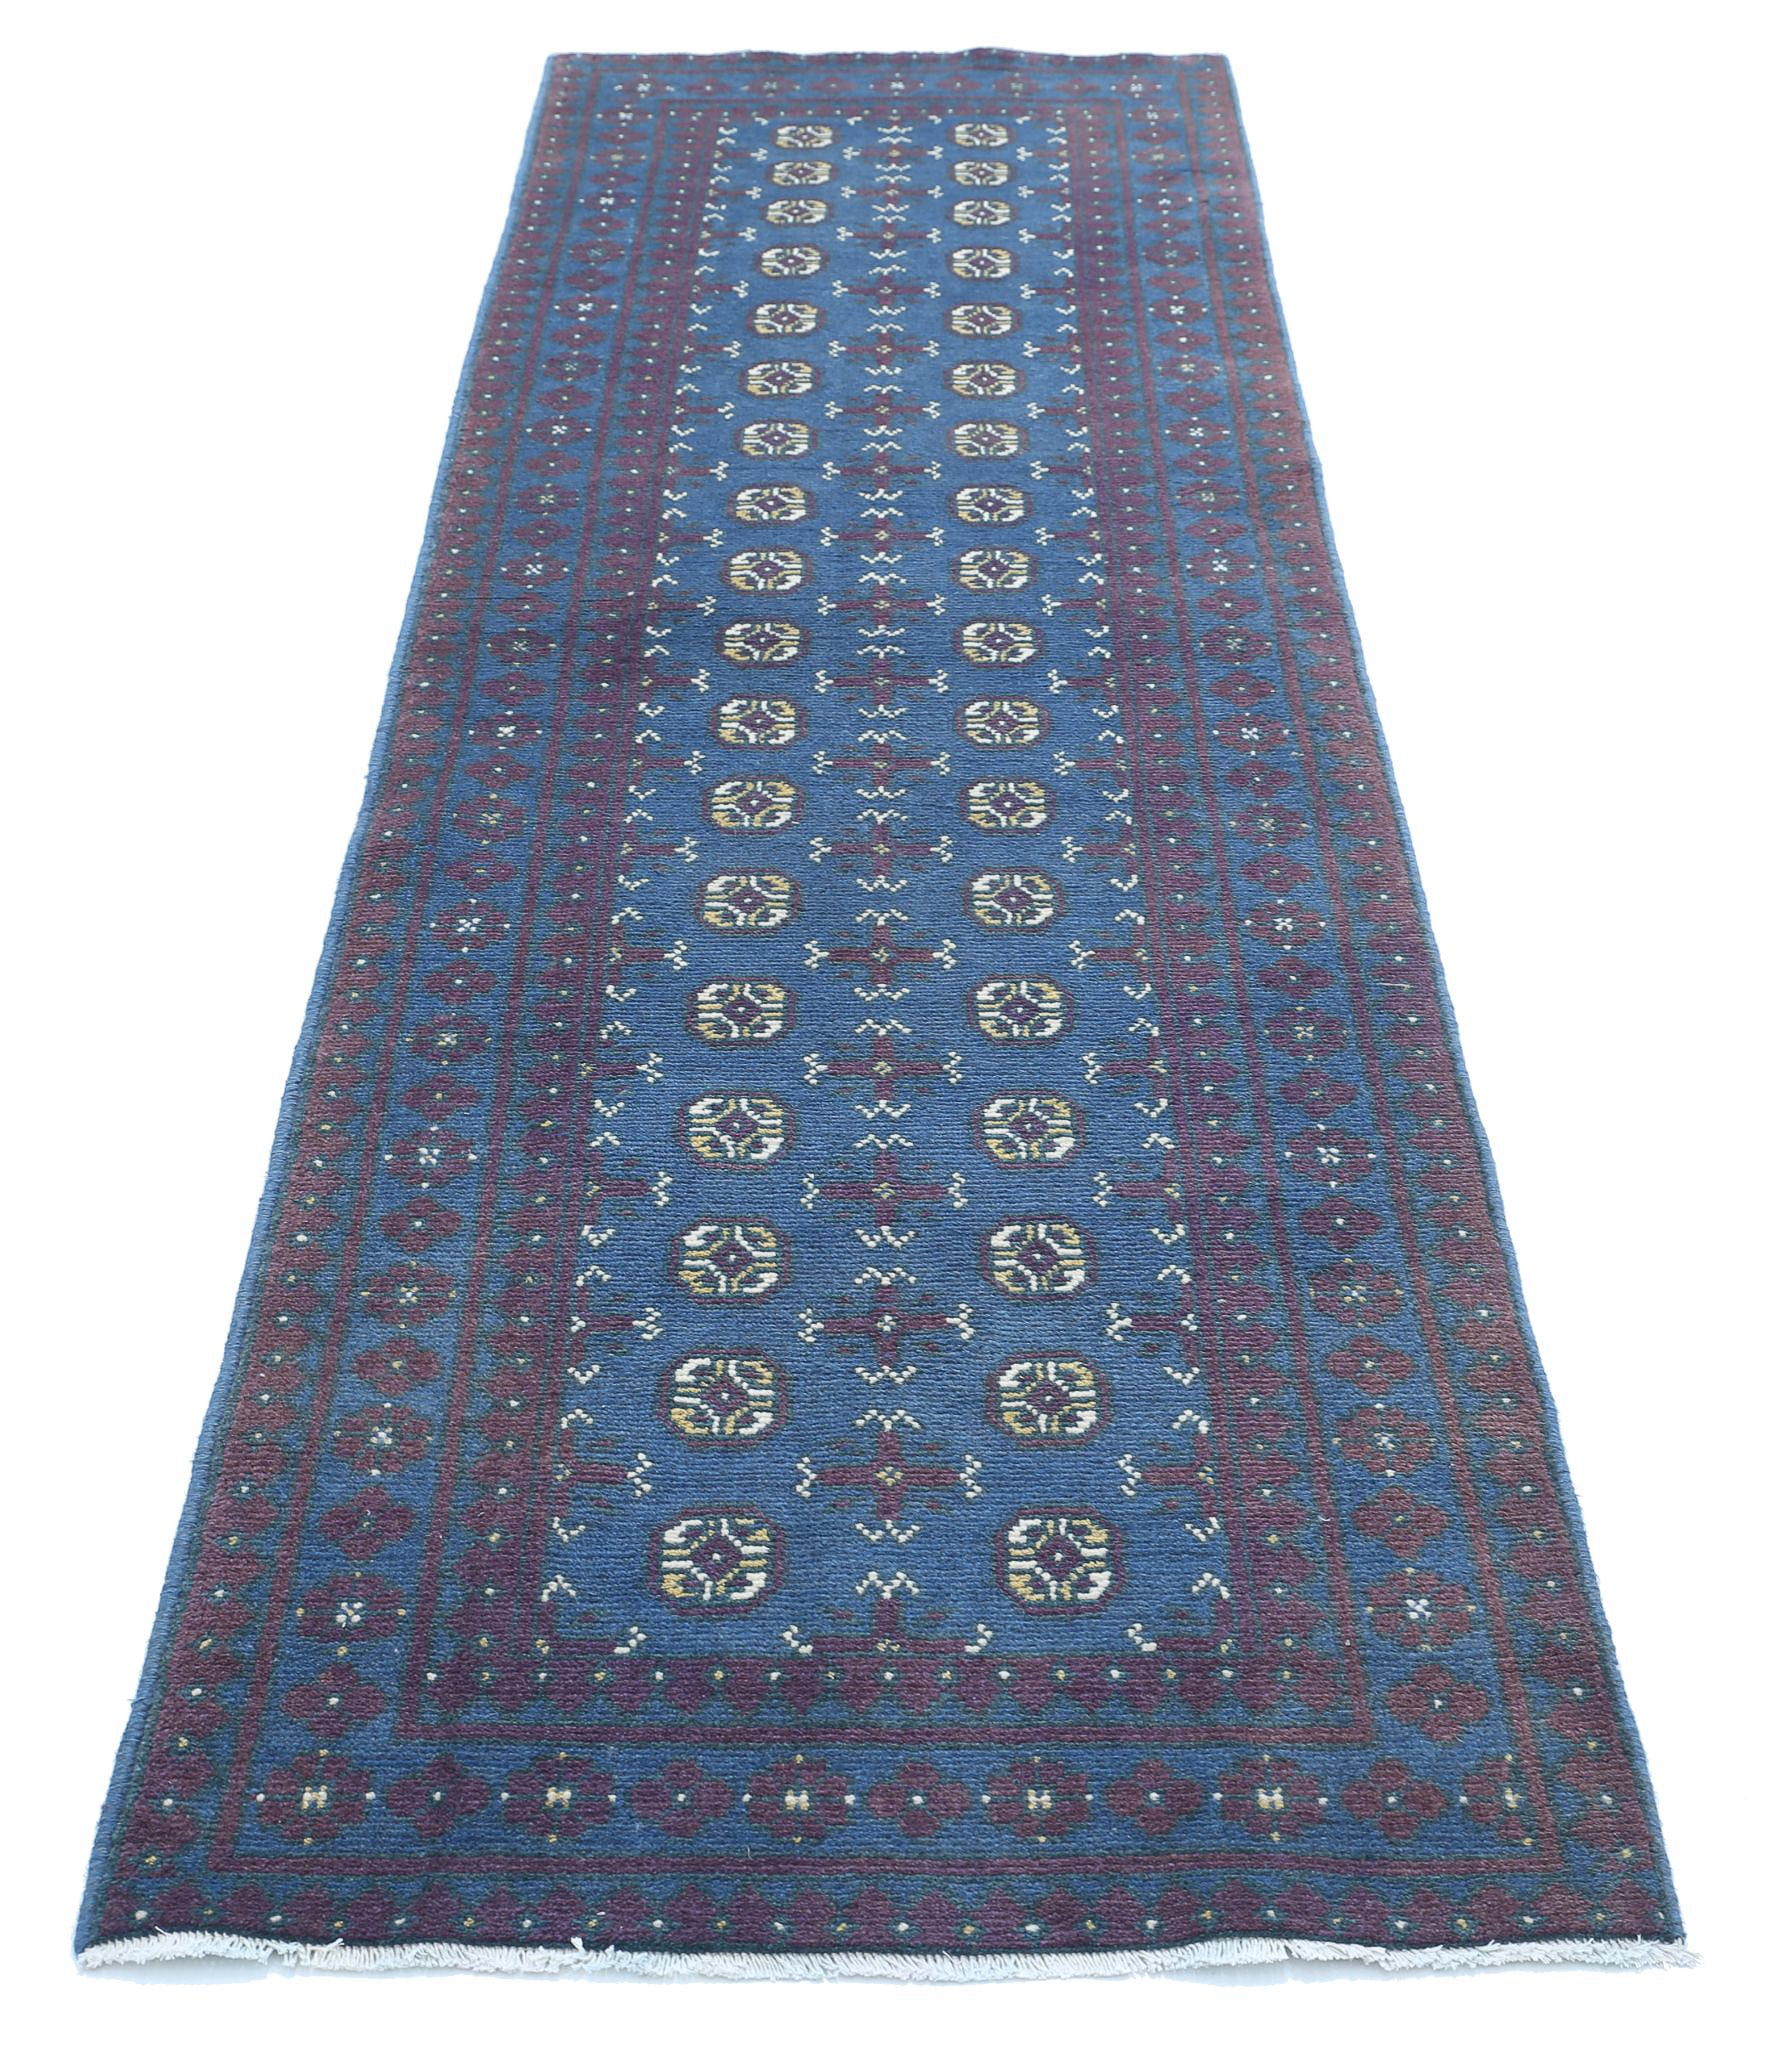 Revival-hand-knotted-gul-collection-wool-rug-5013997-3.jpg